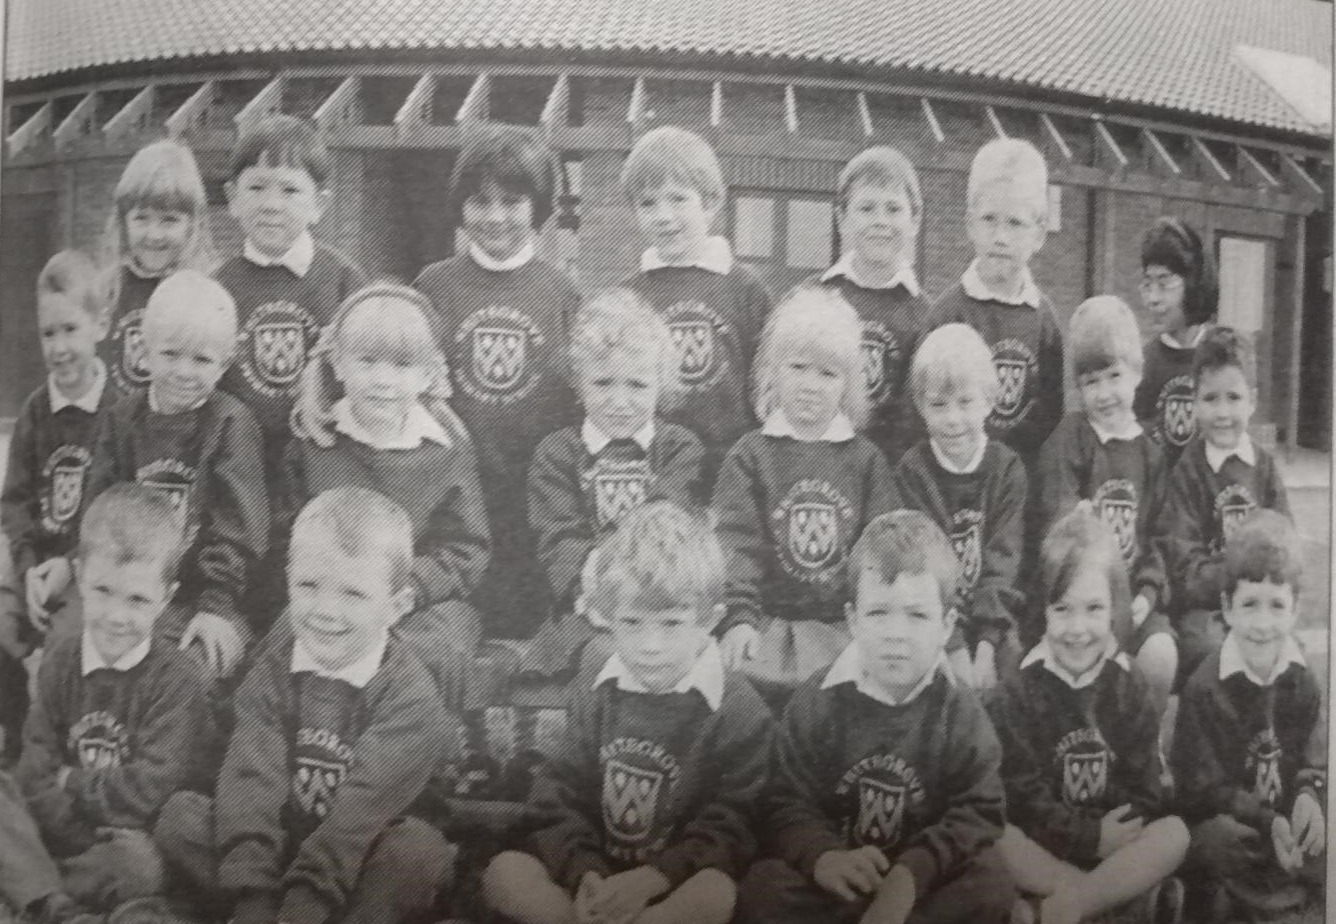 Whitegrove Primary School with their new pupils back in 97